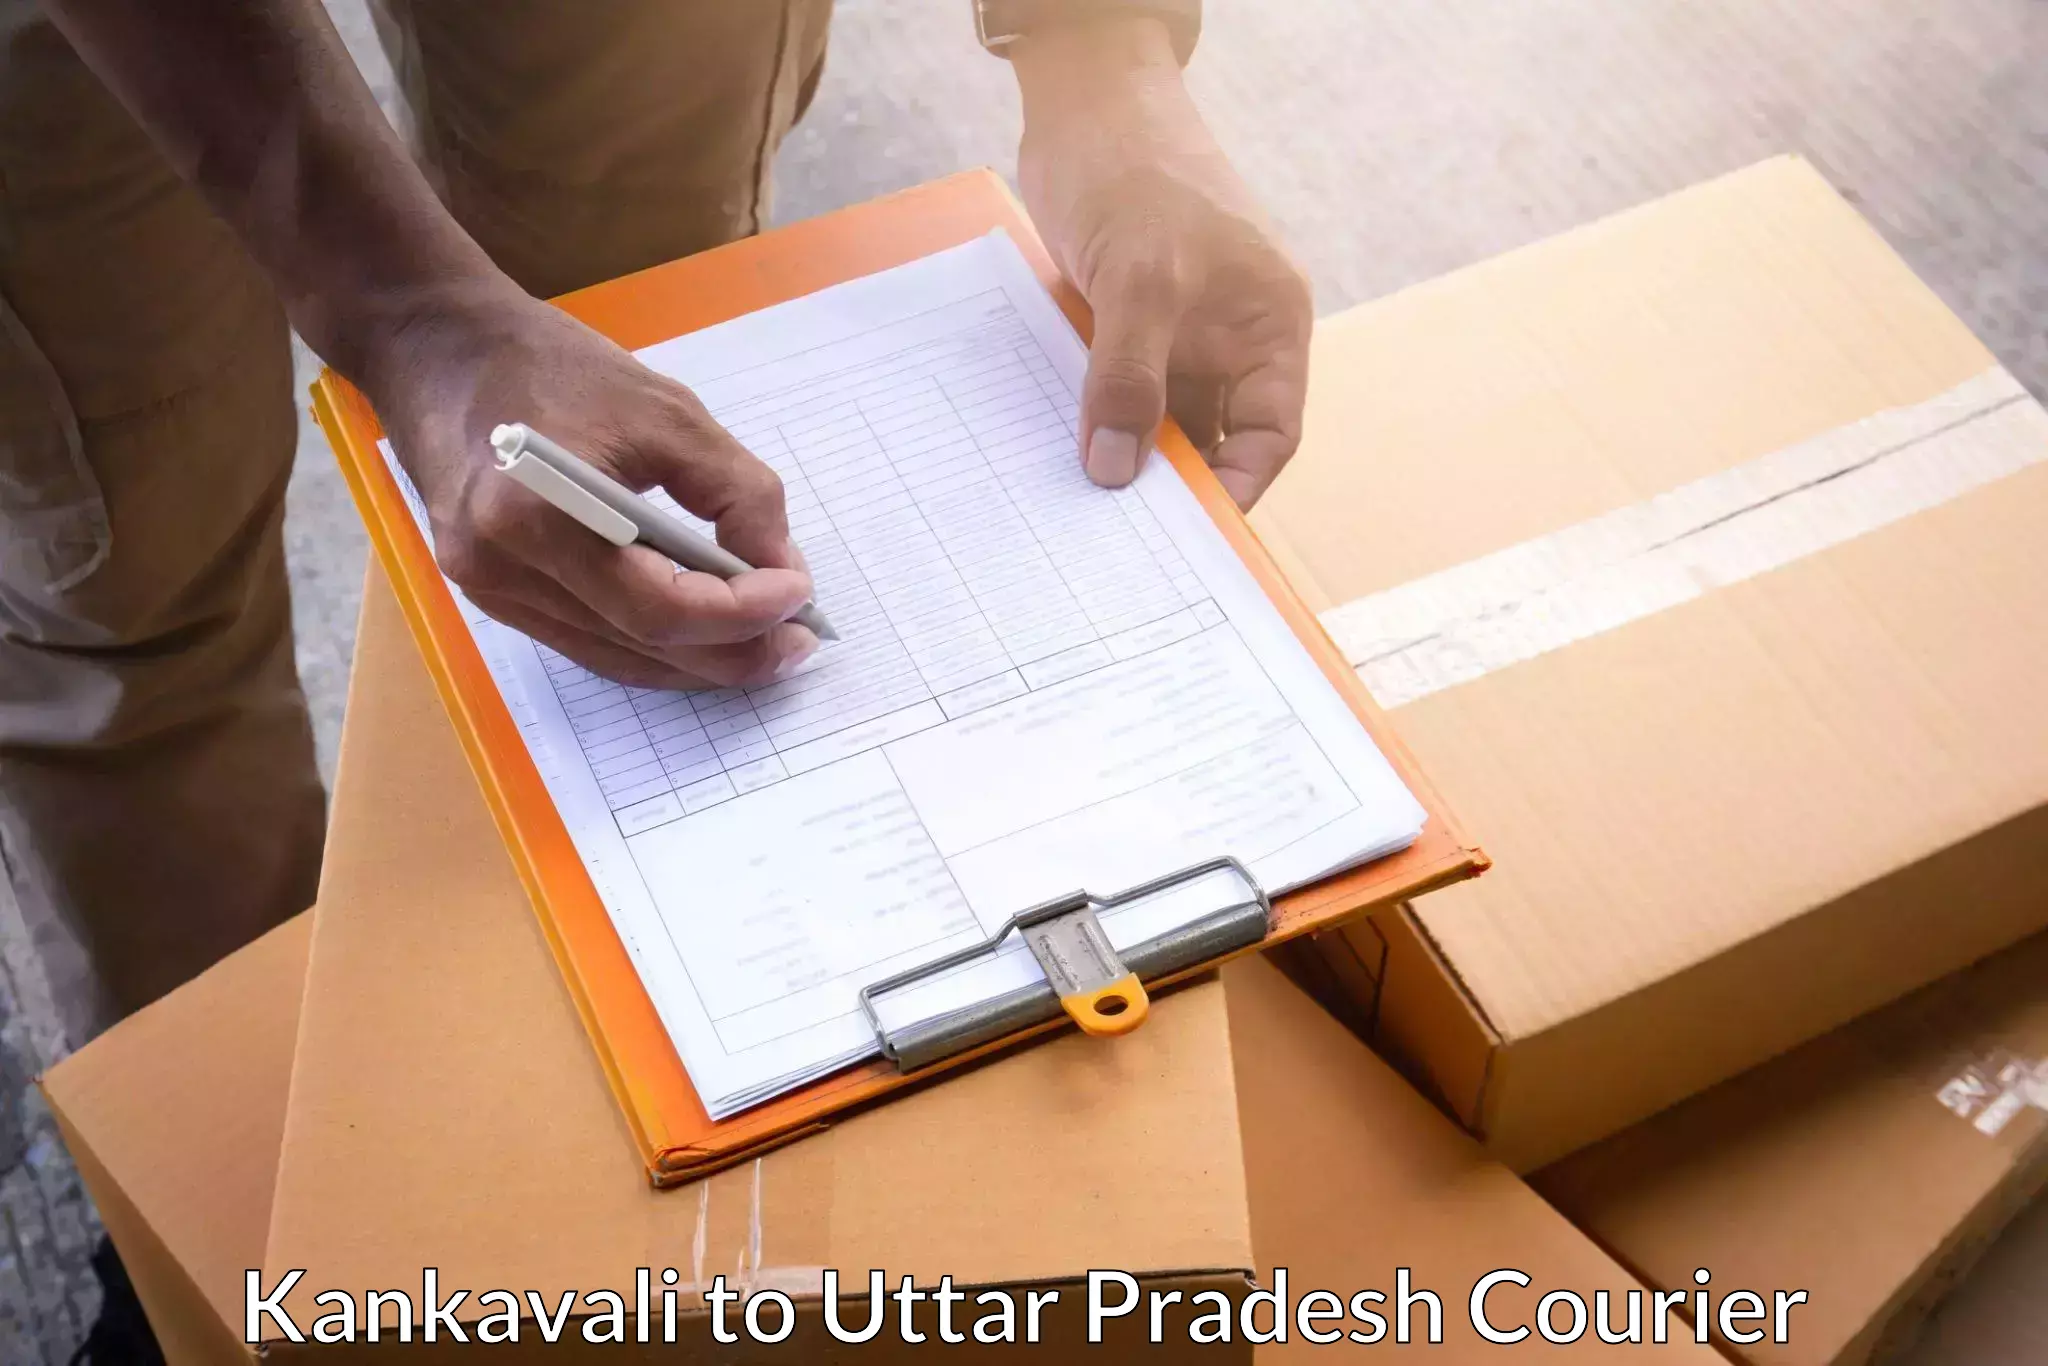 Air courier services Kankavali to Noida